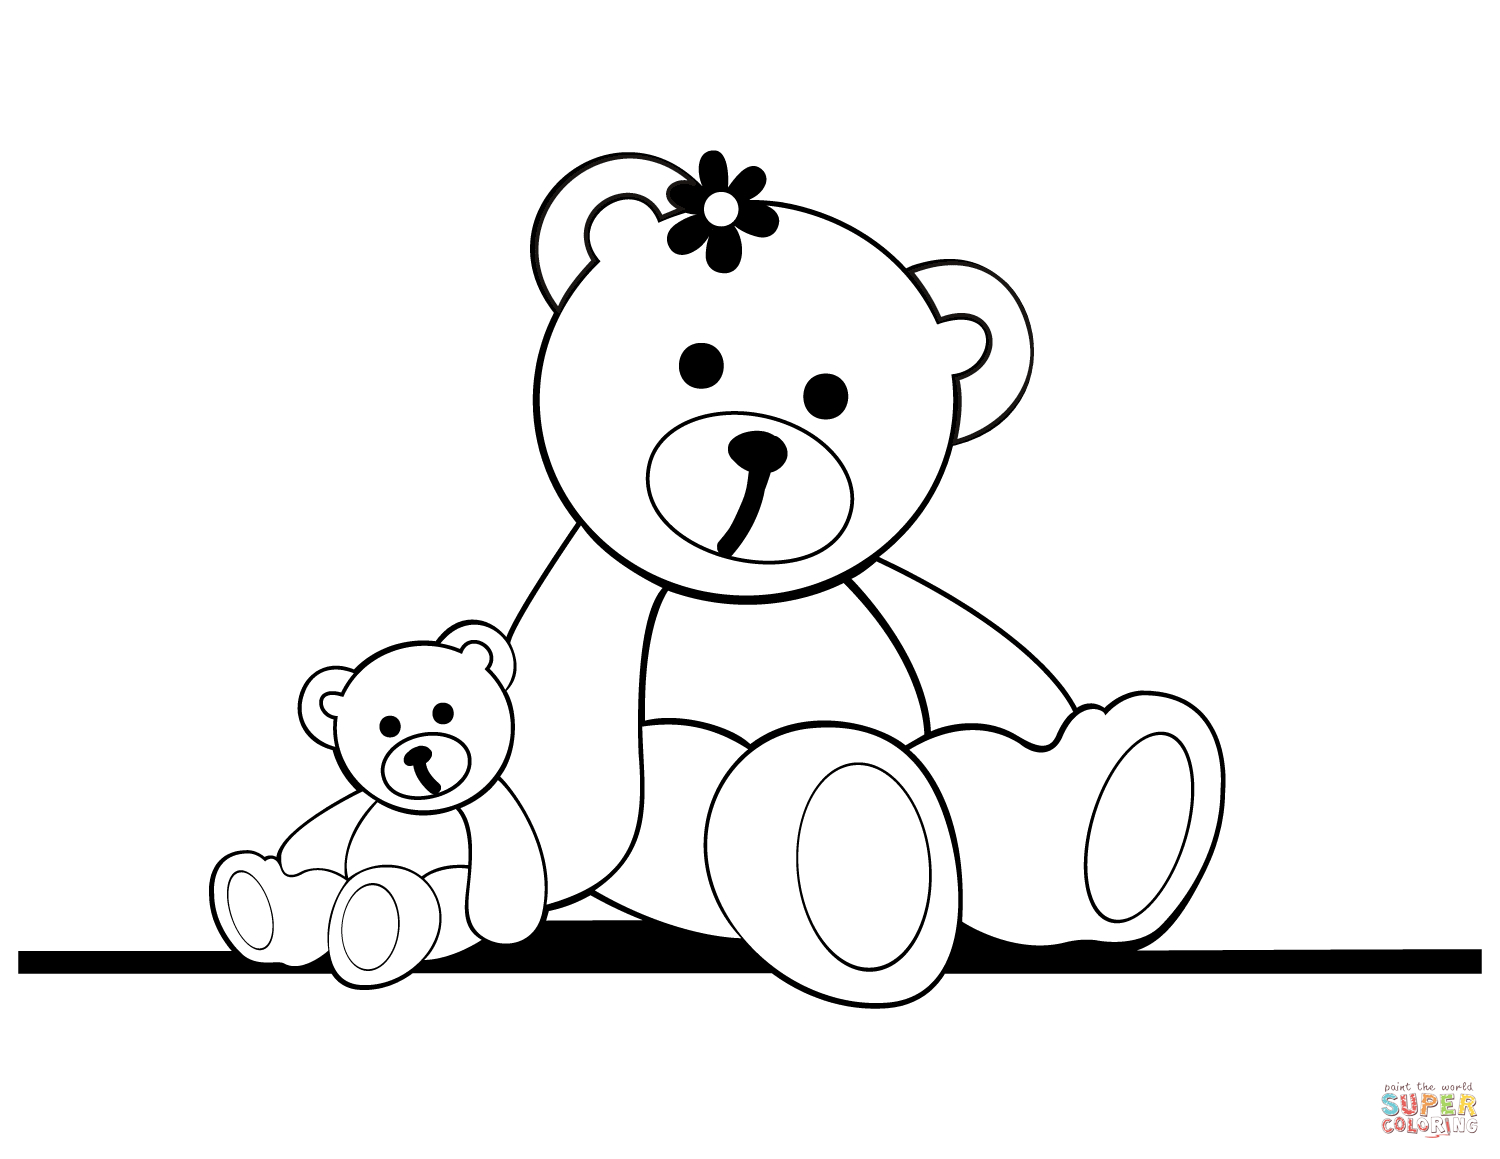 Bears Coloring Pages Teddy Bears Coloring Page Free Printable Coloring Pages